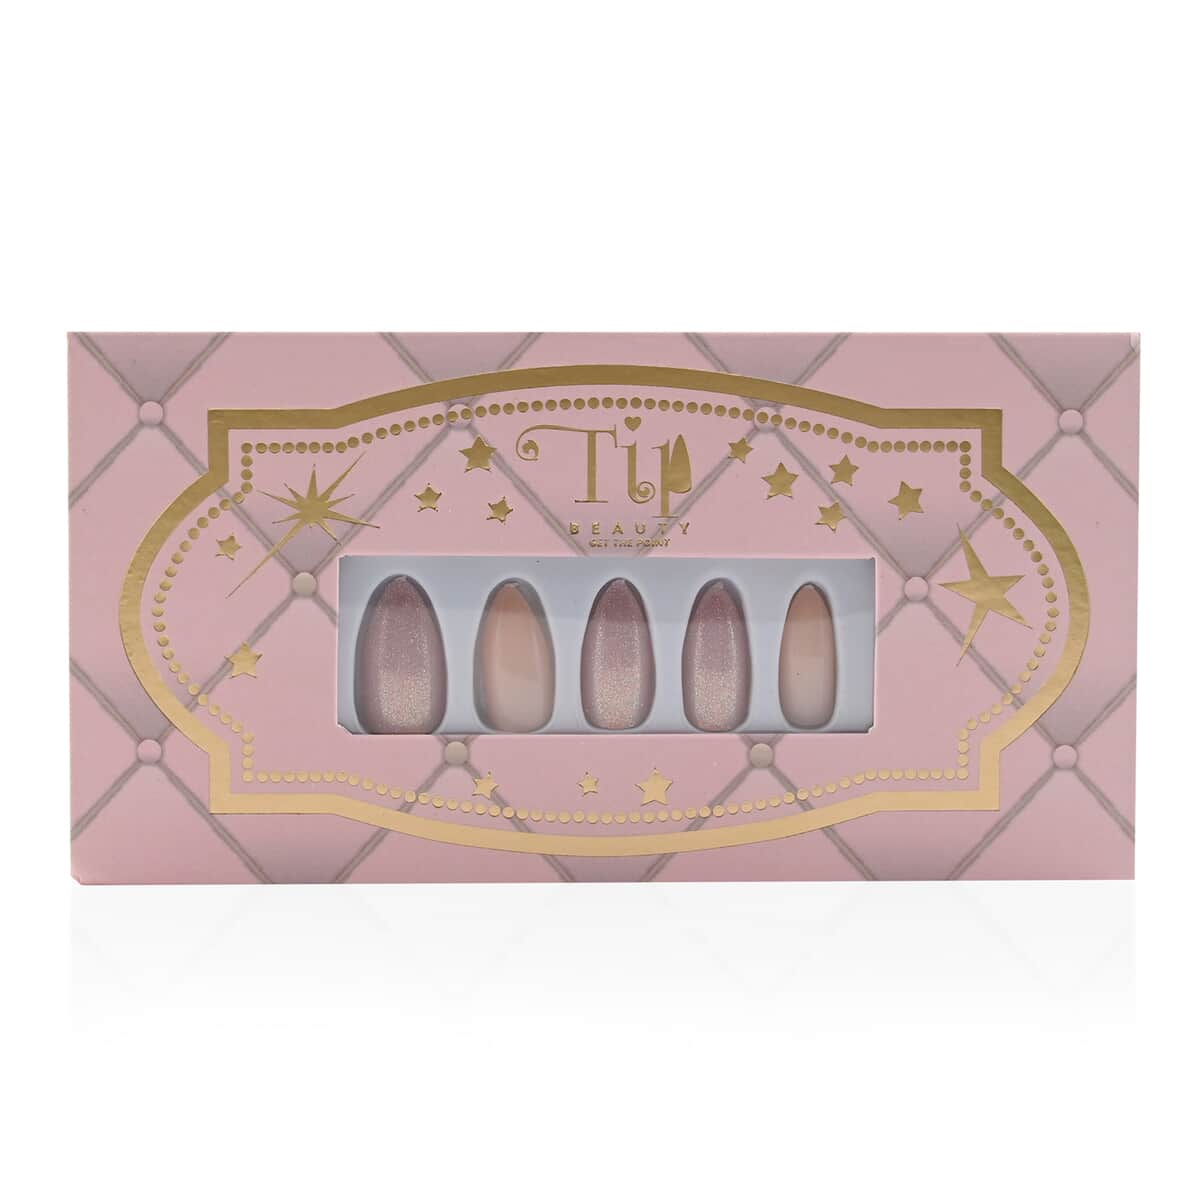 Tip Beauty Set of 5 CUPCAKE Press-on Nails image number 2